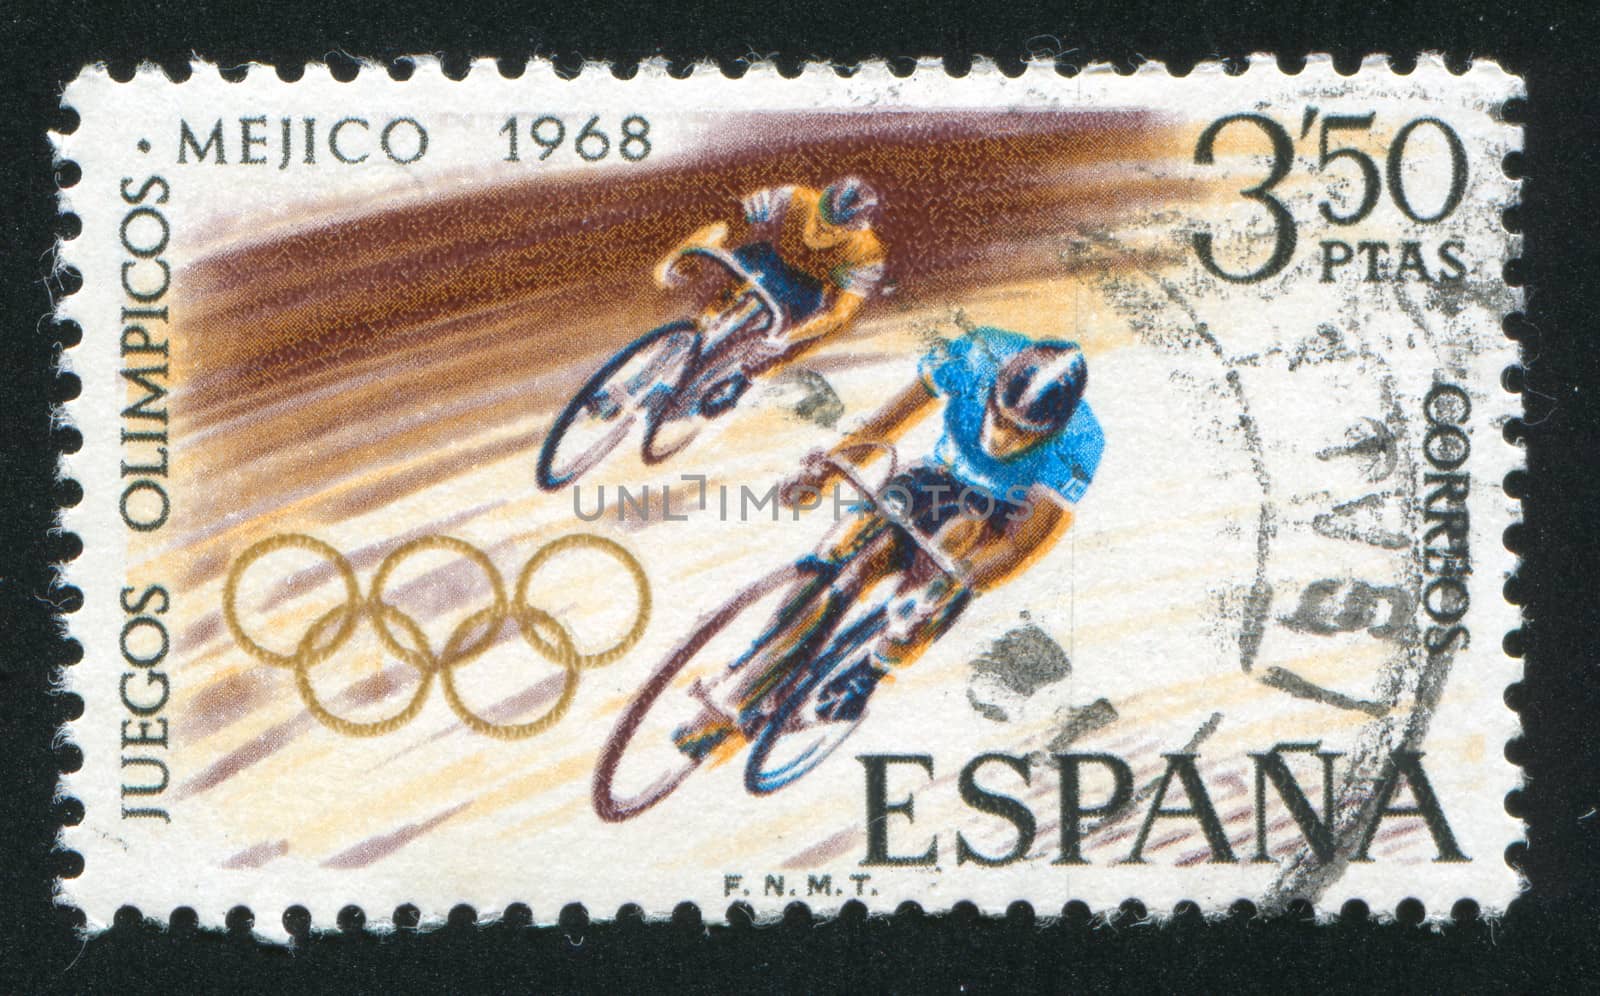 SPAIN - CIRCA 1968: stamp printed by Spain, shows Bicycling, circa 1968